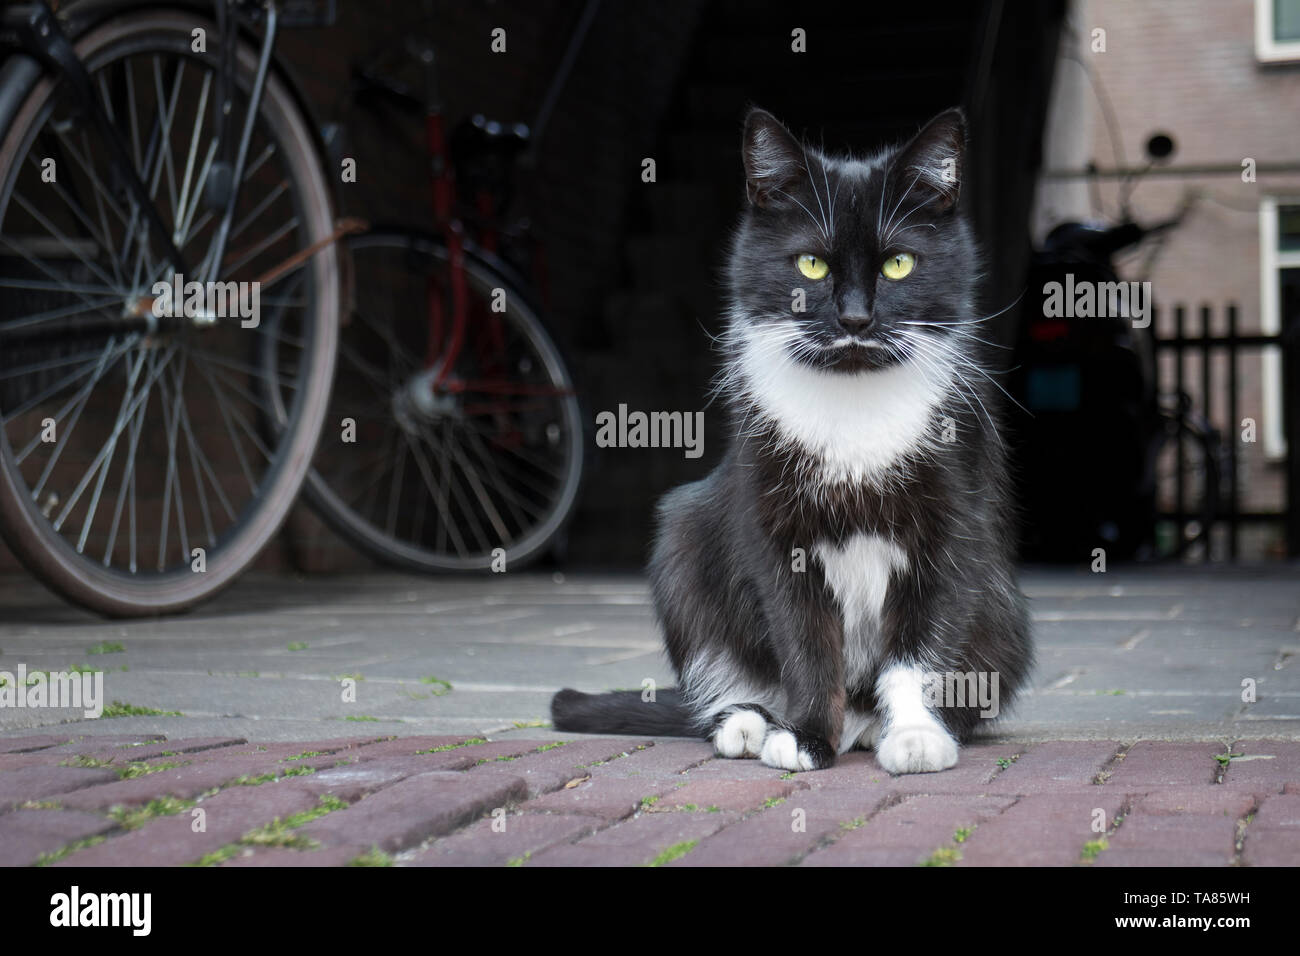 Black and white cat sitting on the street and looking into camera Stock Photo